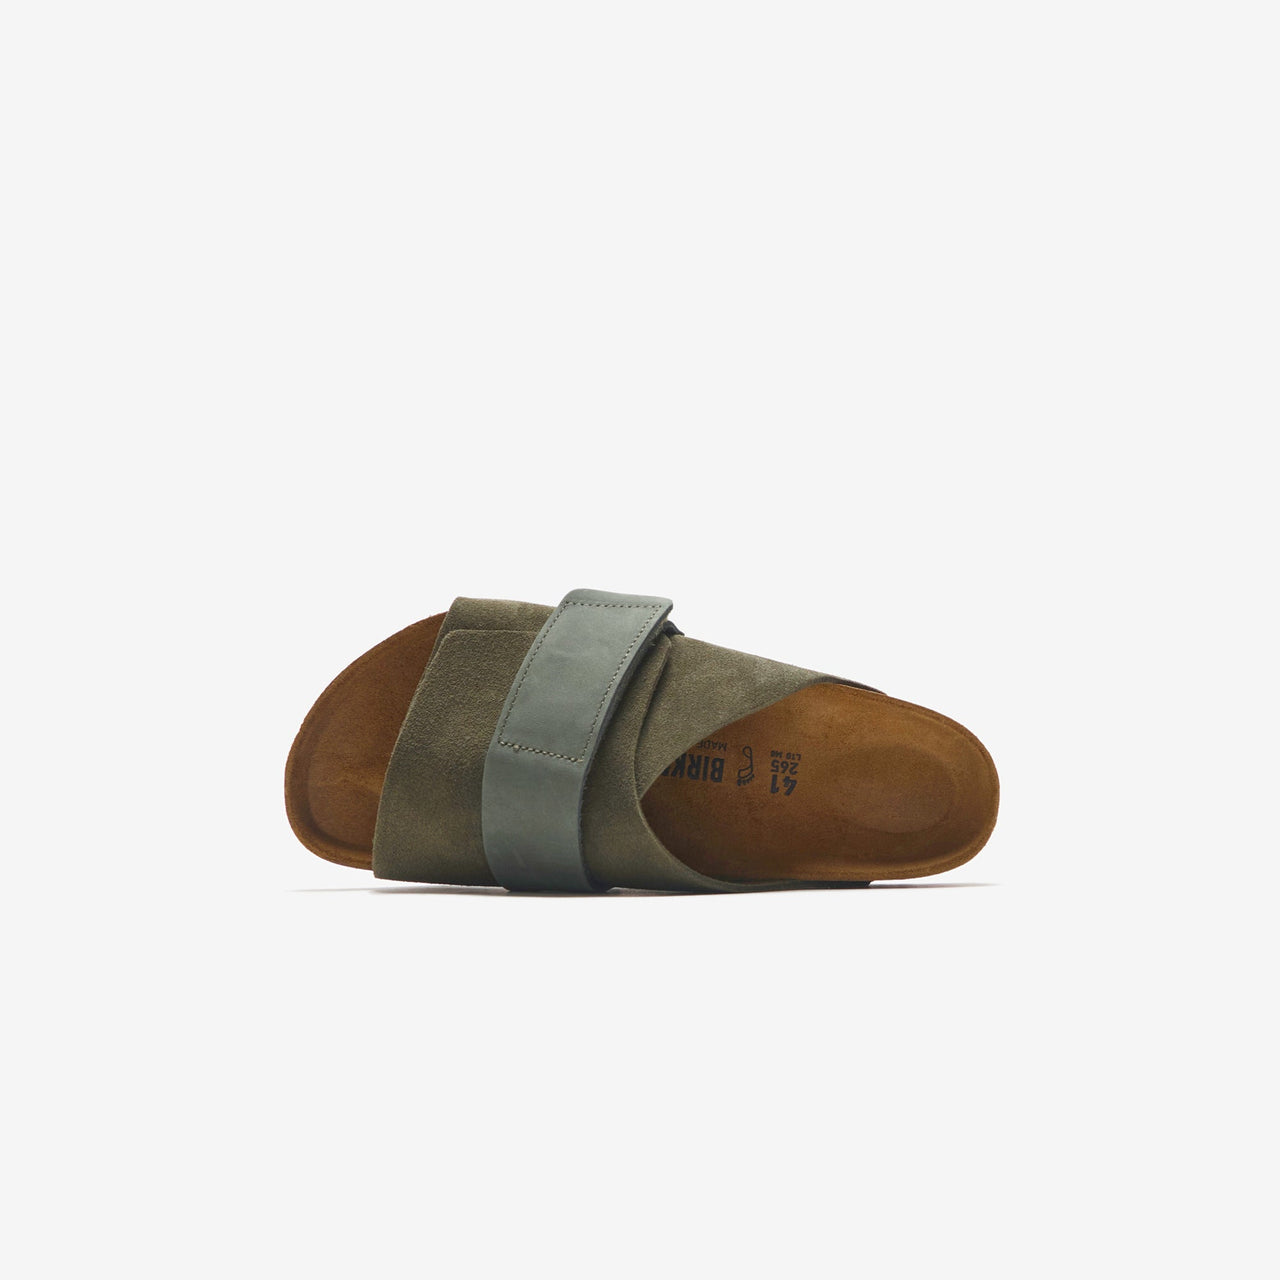 Birkenstock Kyoto Suede Thyme sandals with durable rubber outsole